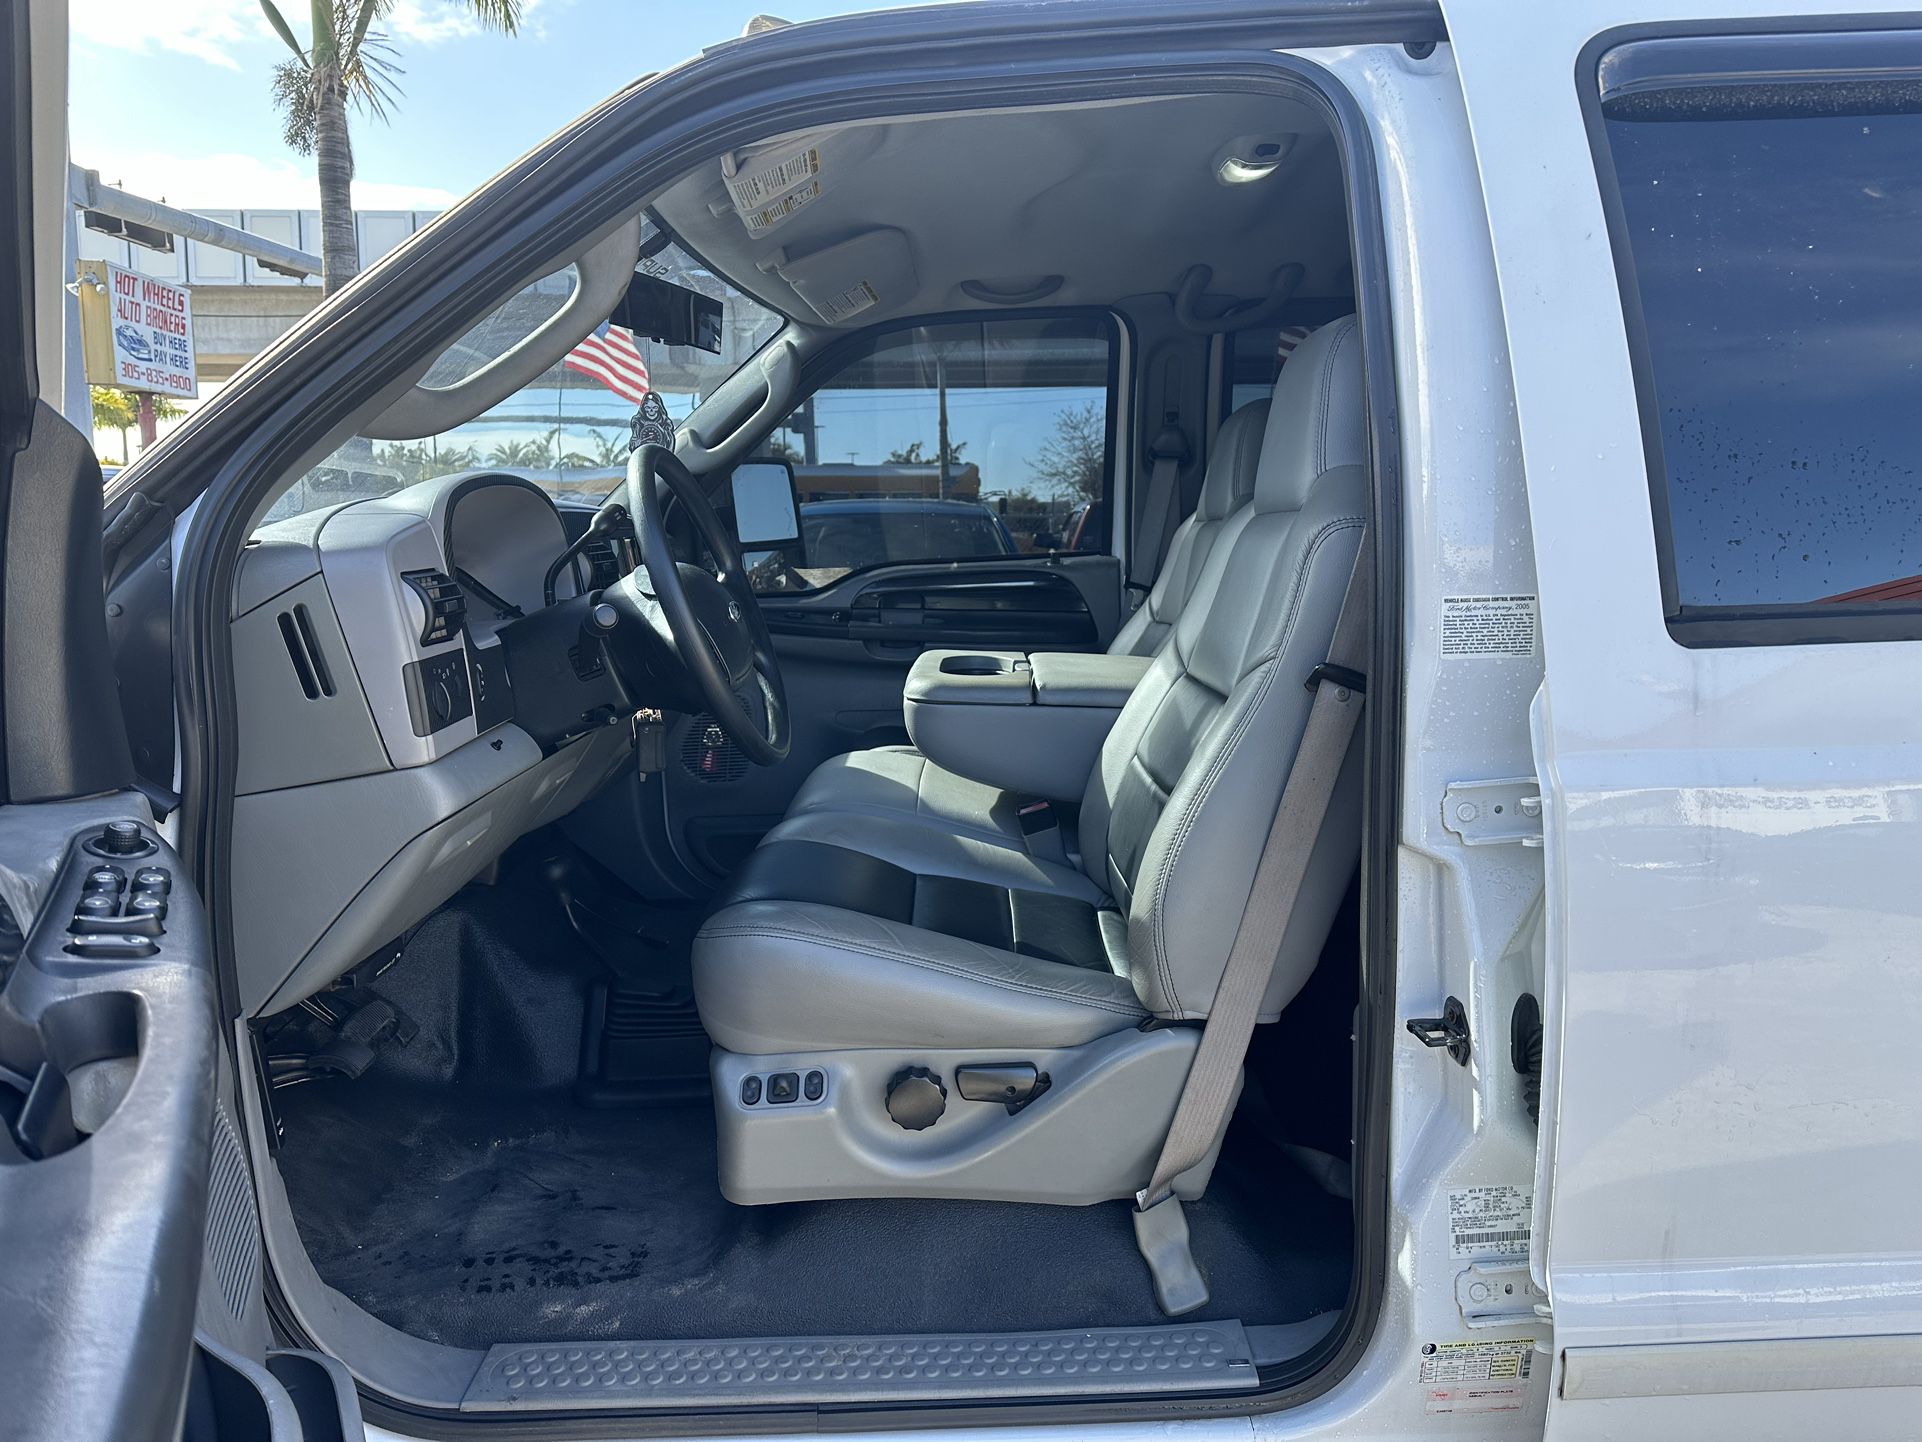 used 2006 ford F -350. Super Duty - interior view 2